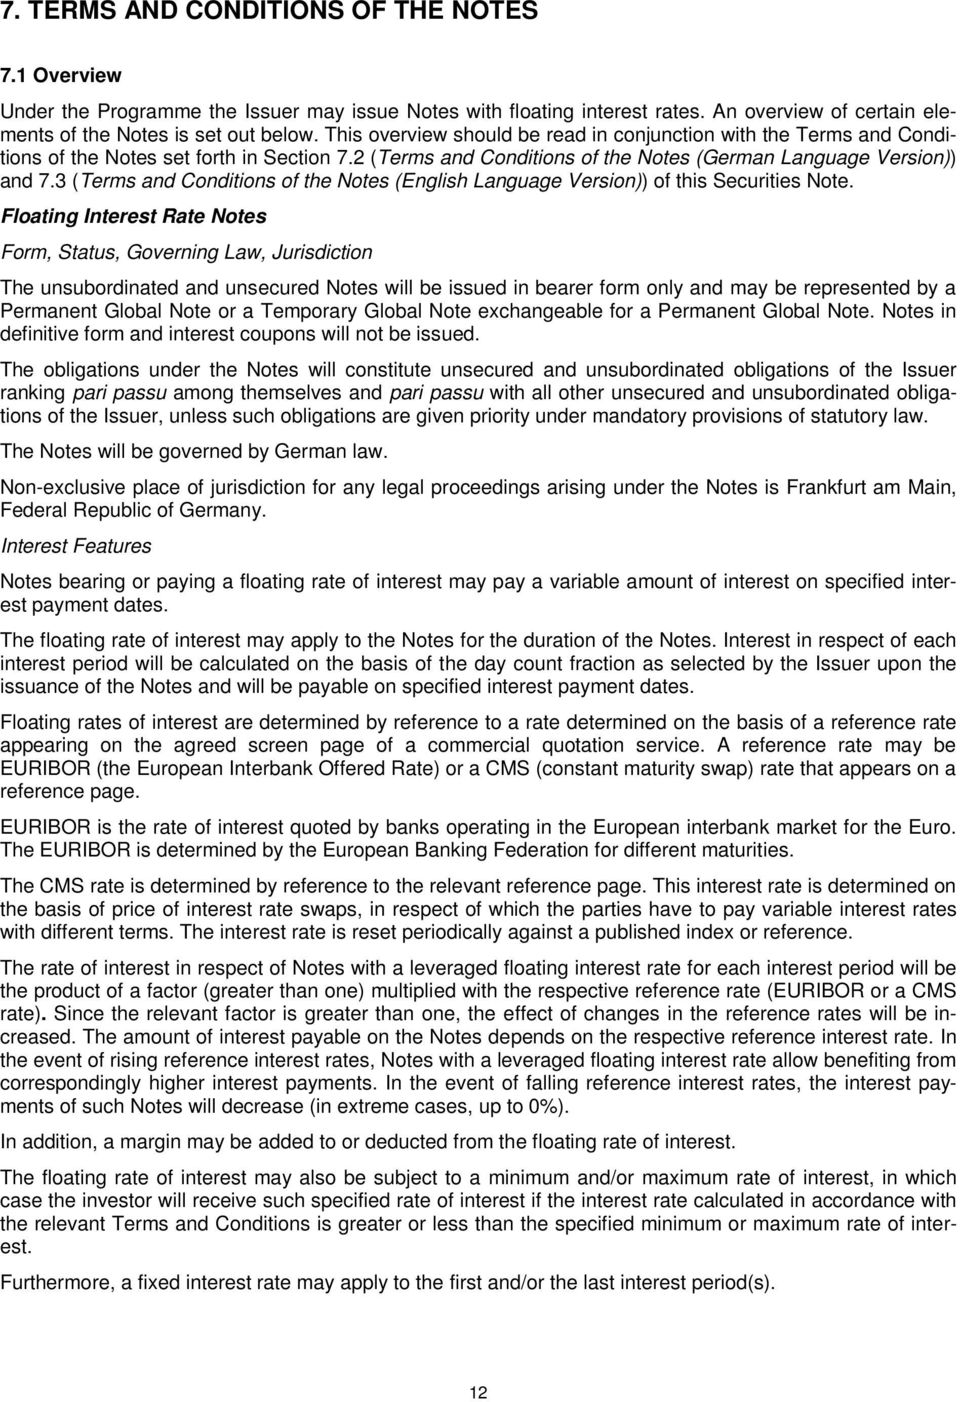 3 (Terms and Conditions of the Notes (English Language Version)) of this Securities Note.